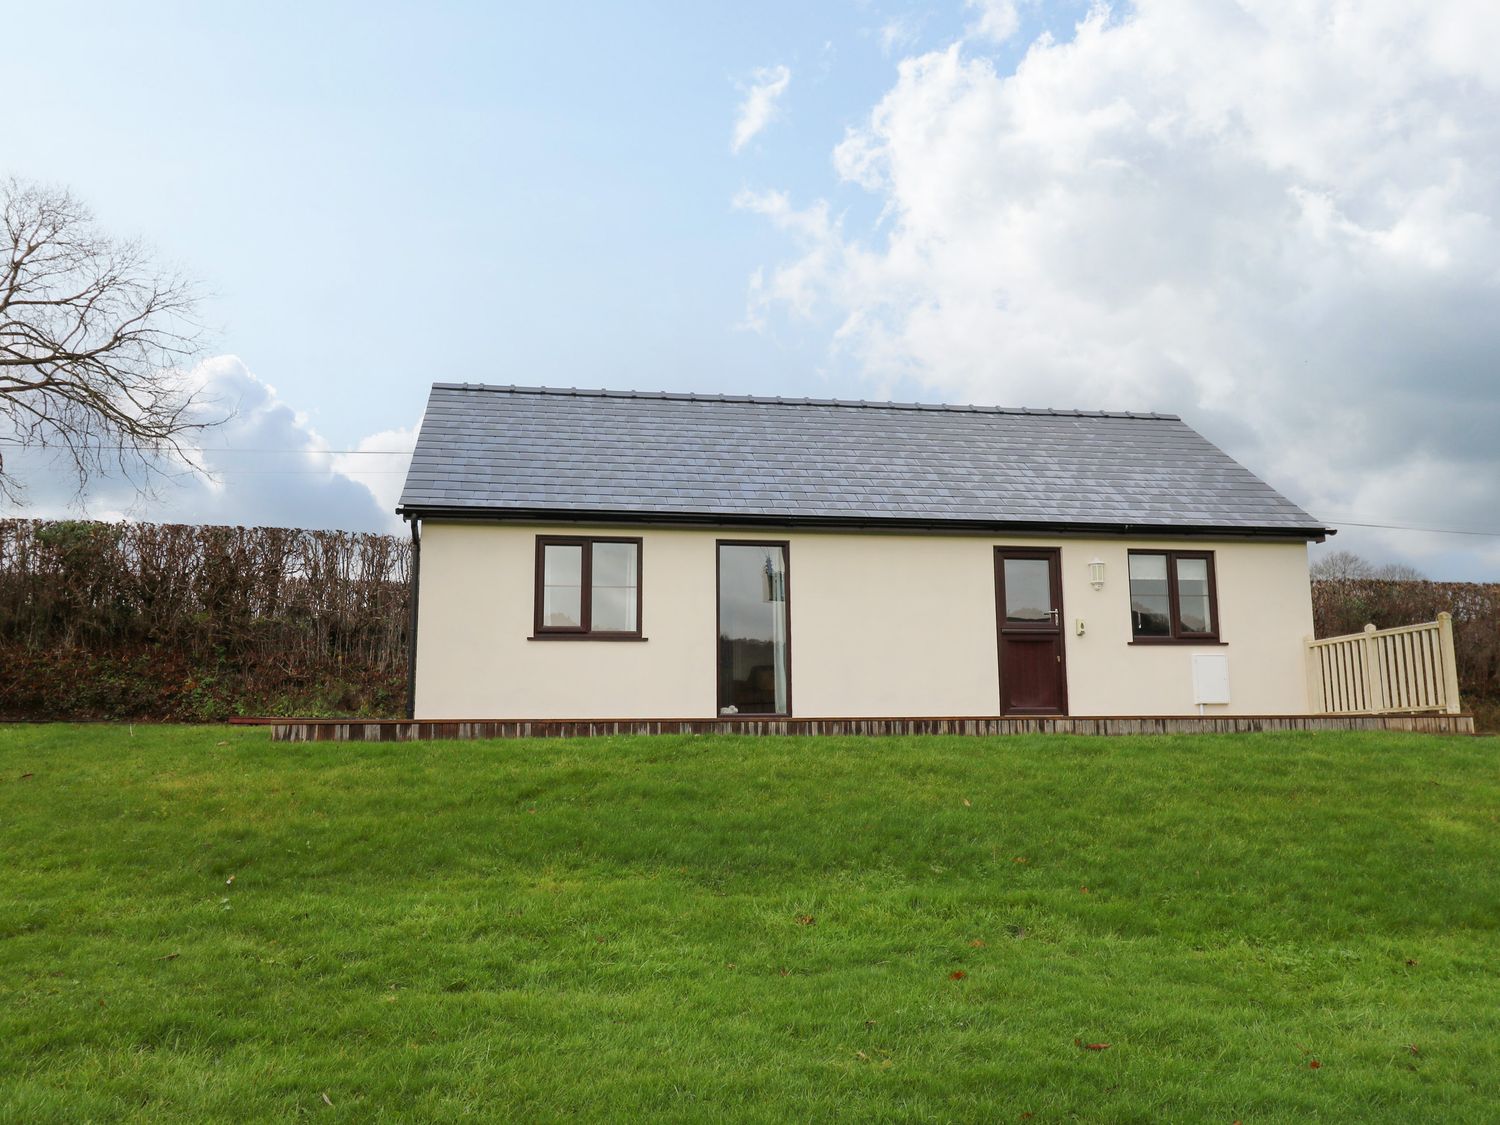 Country Cottage - Mid Wales - 1145295 - photo 1